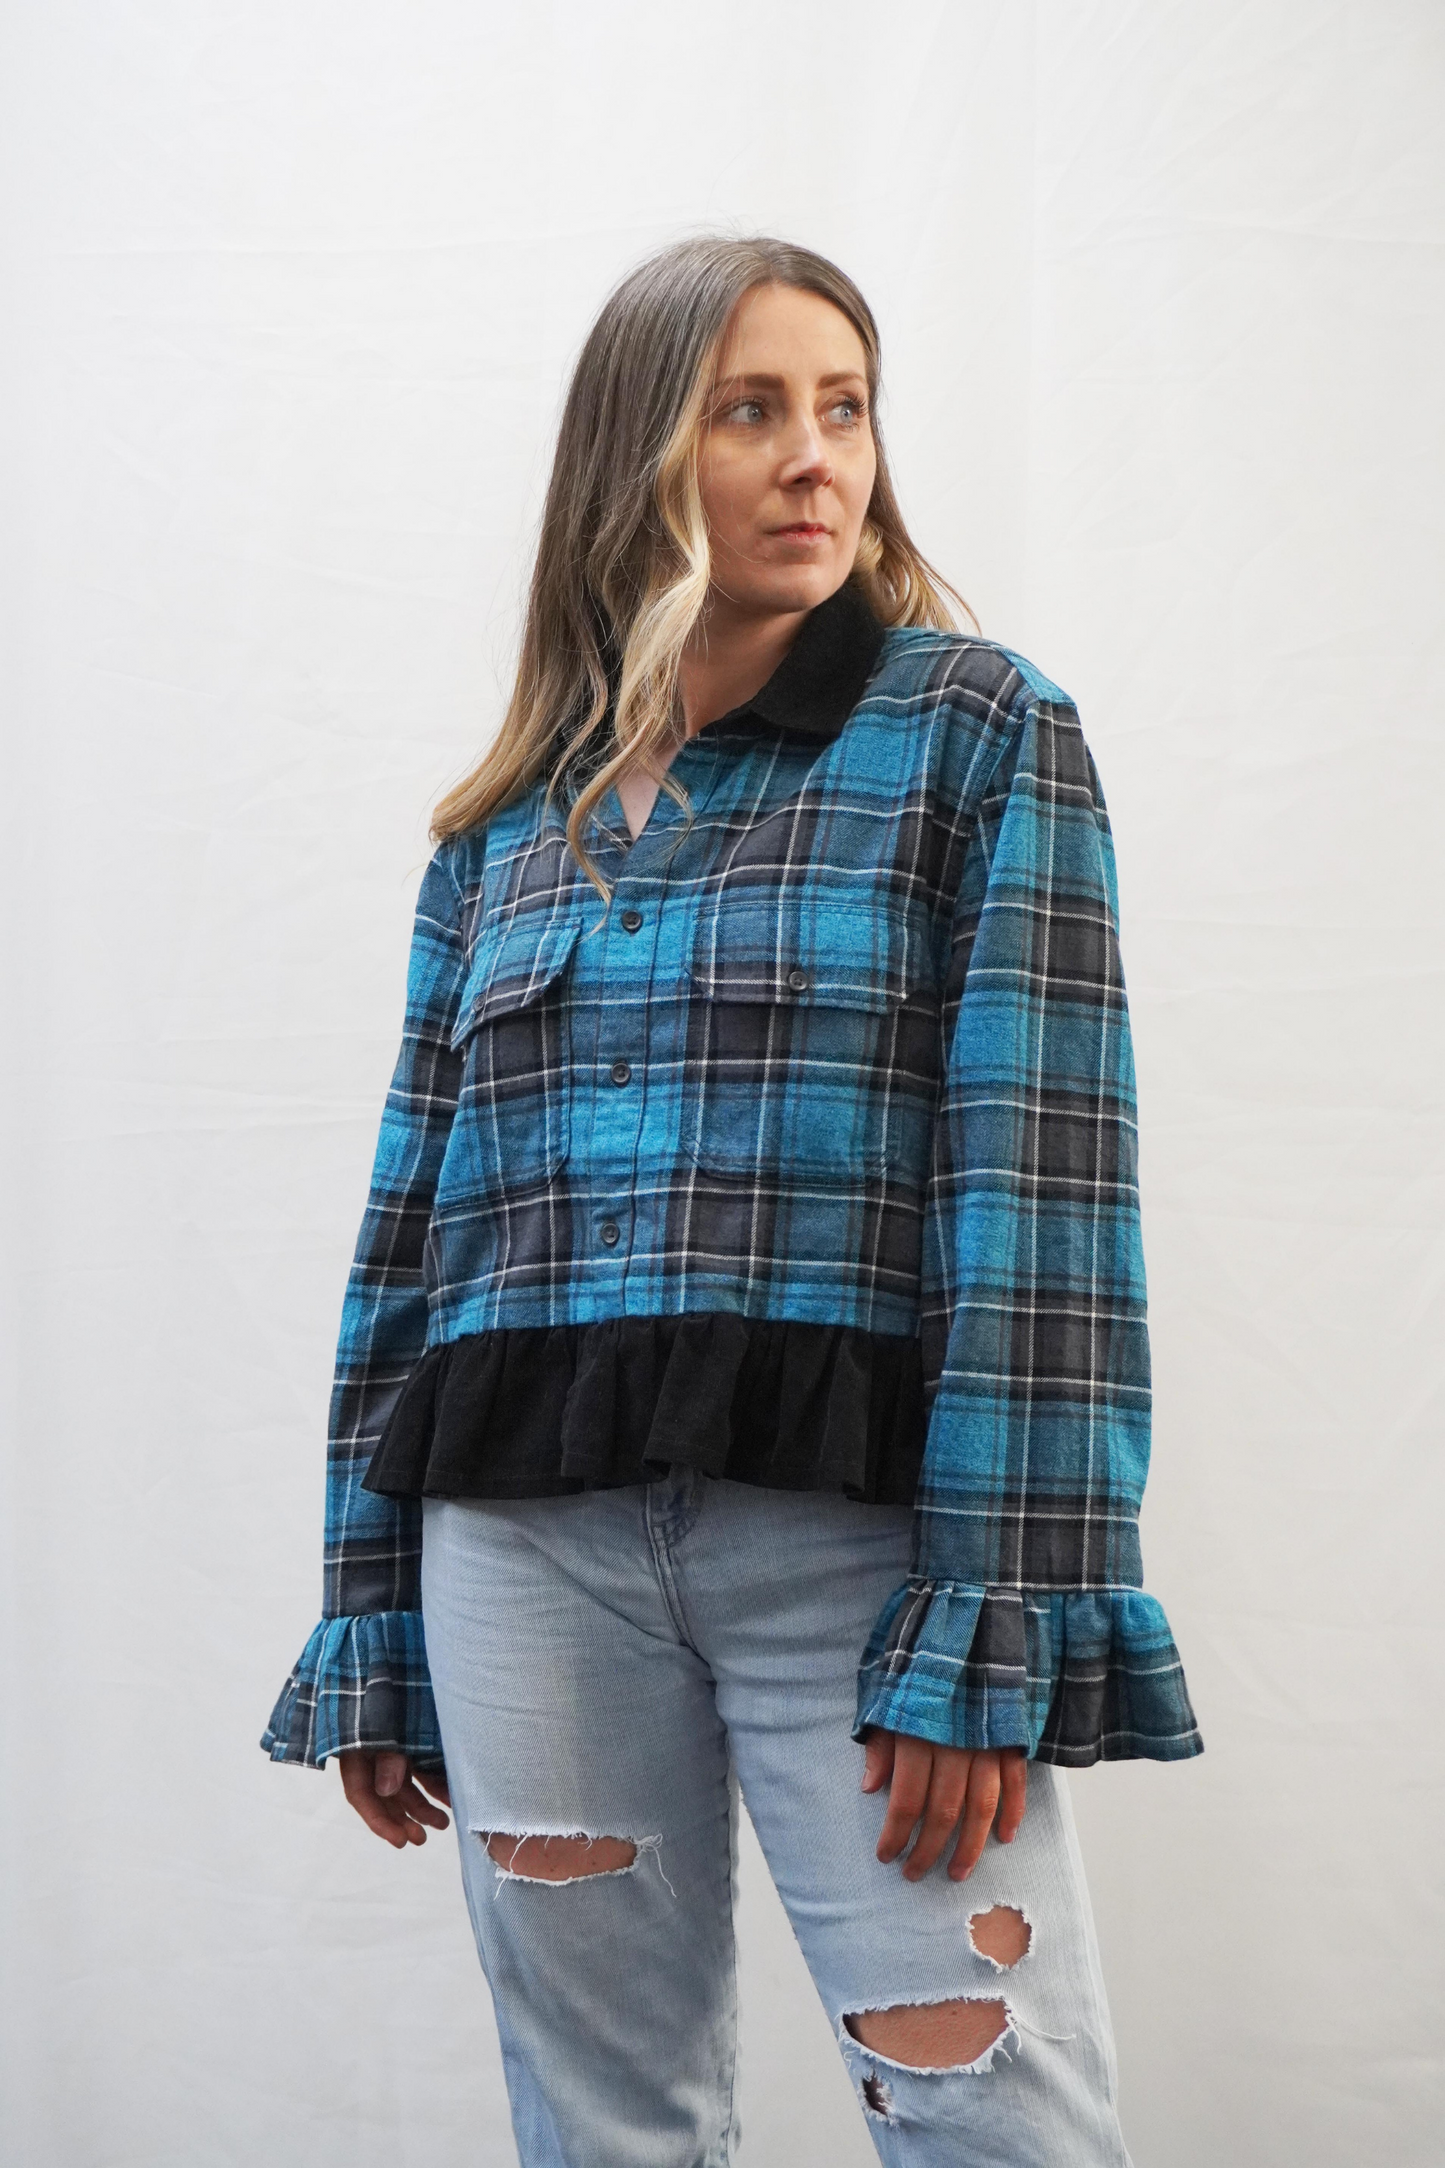 Teal Check with Black Ruffle Overshirt